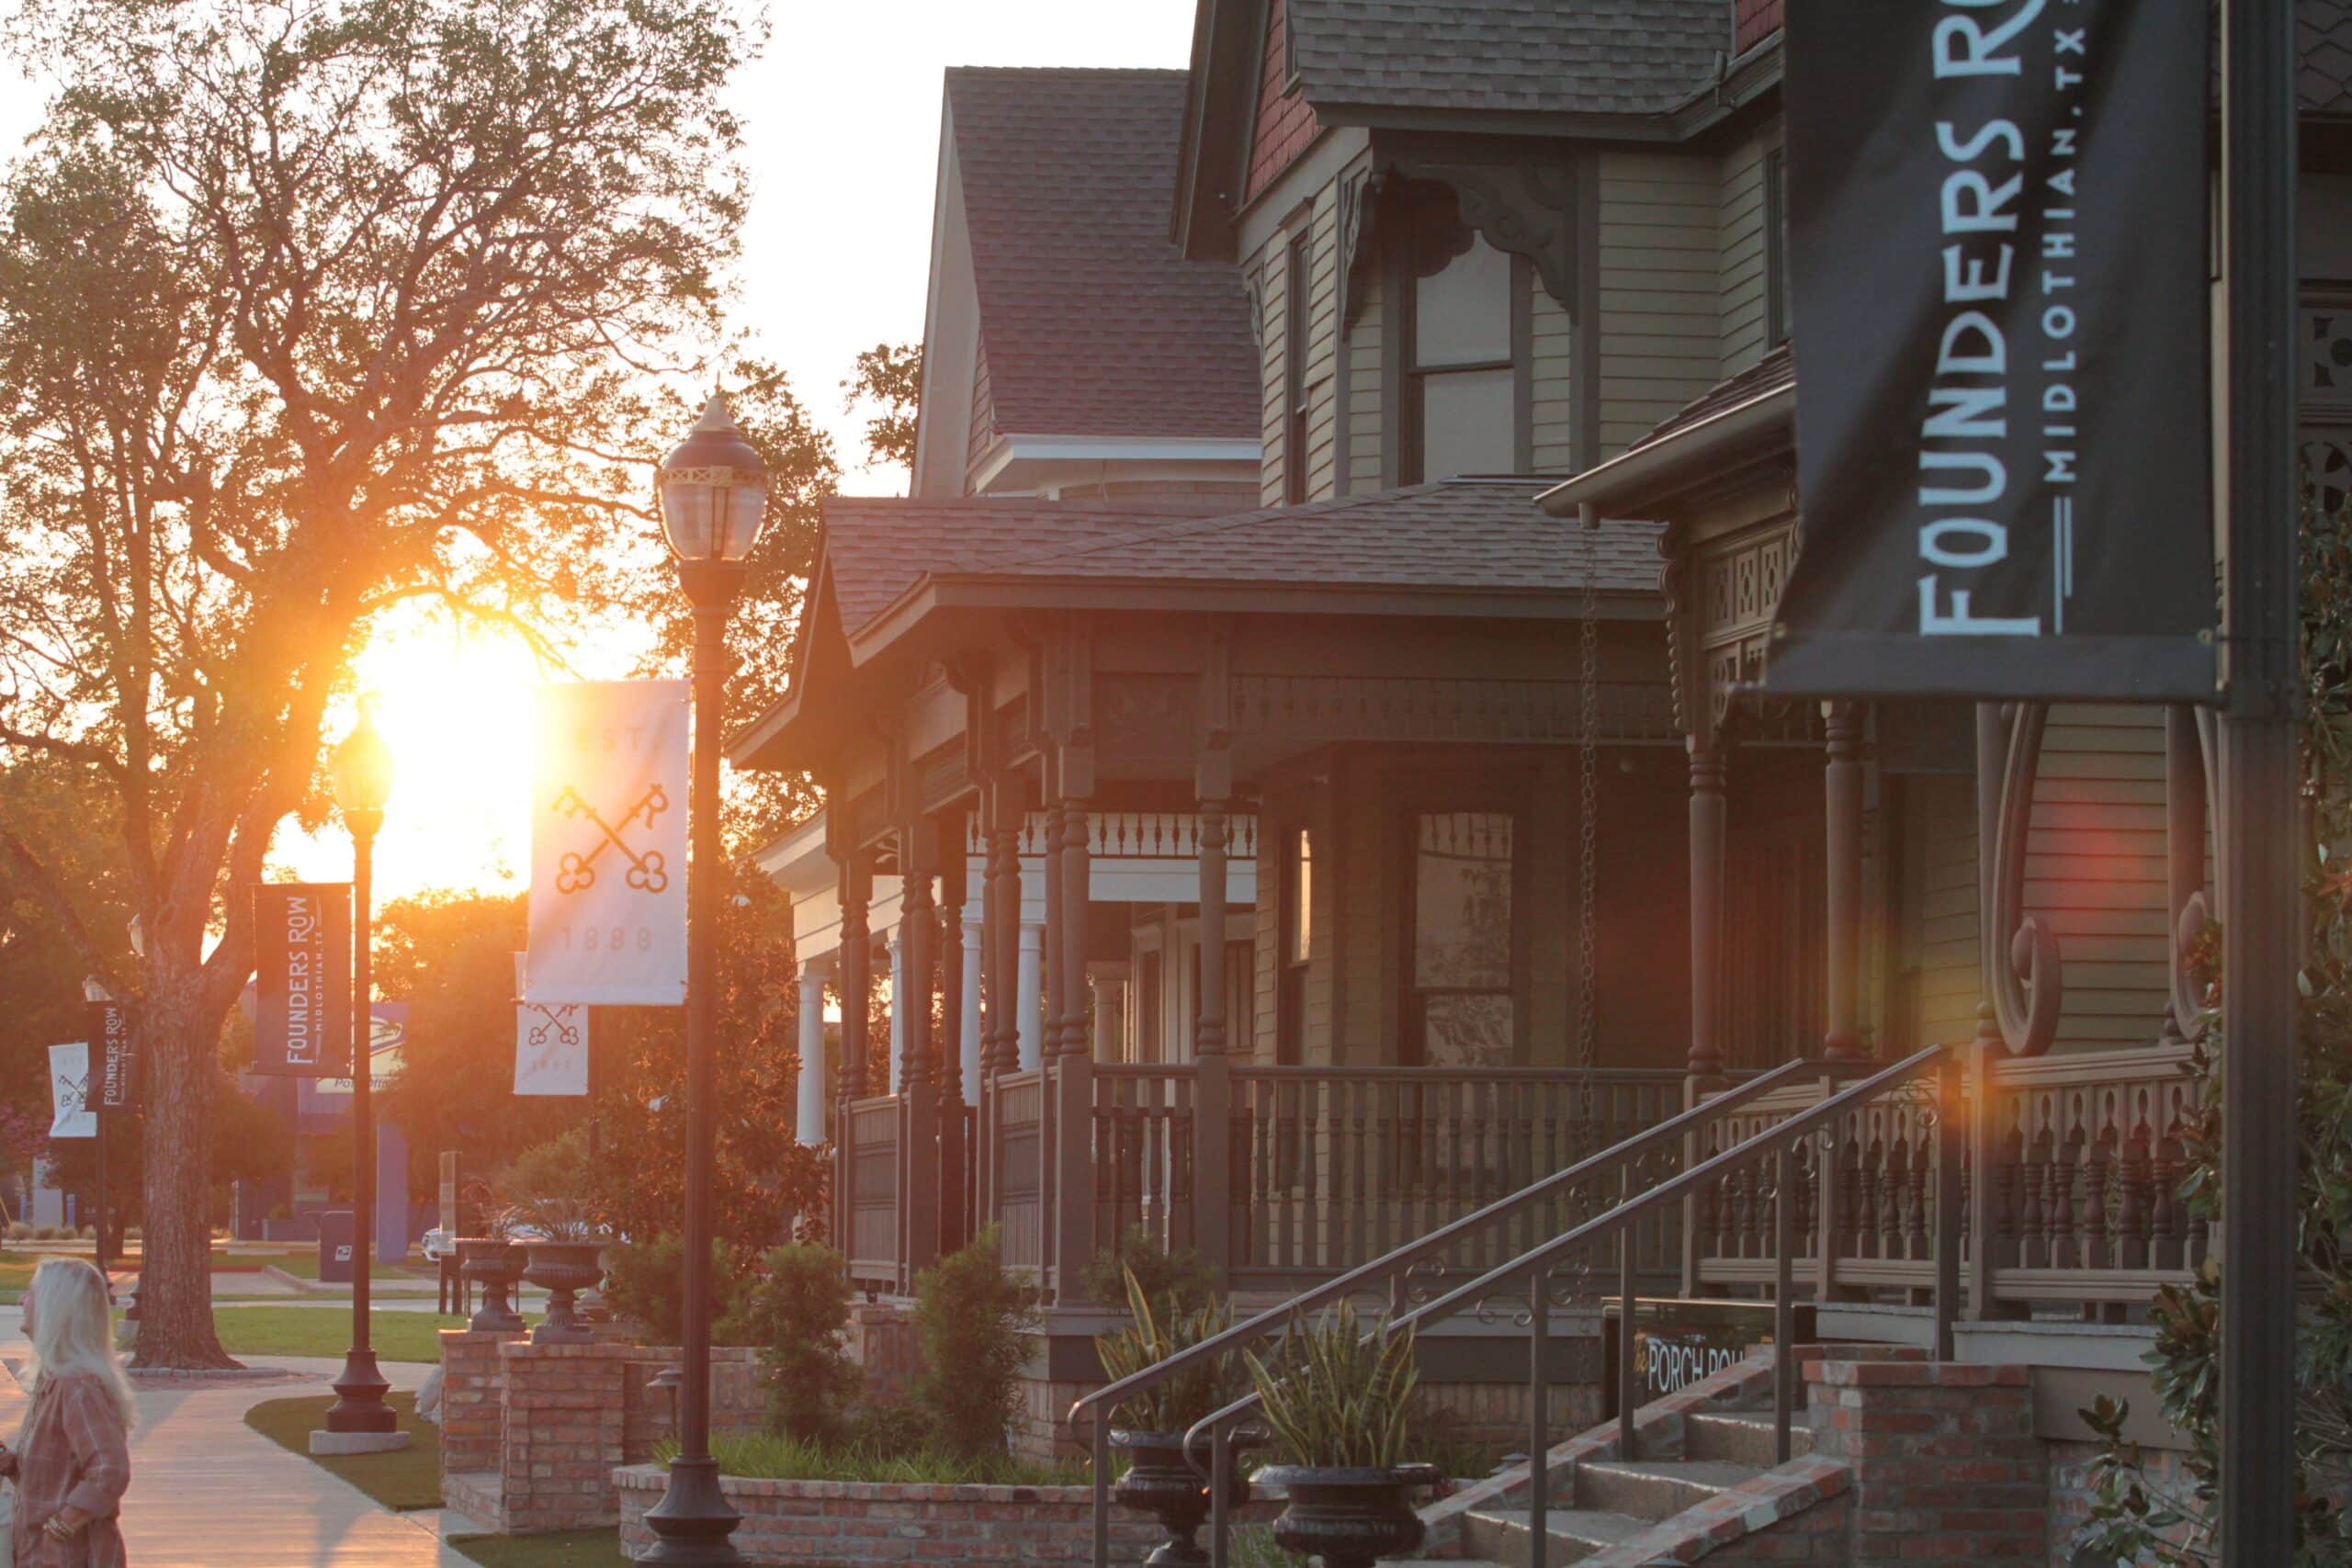 Founders Row homes with sun setting